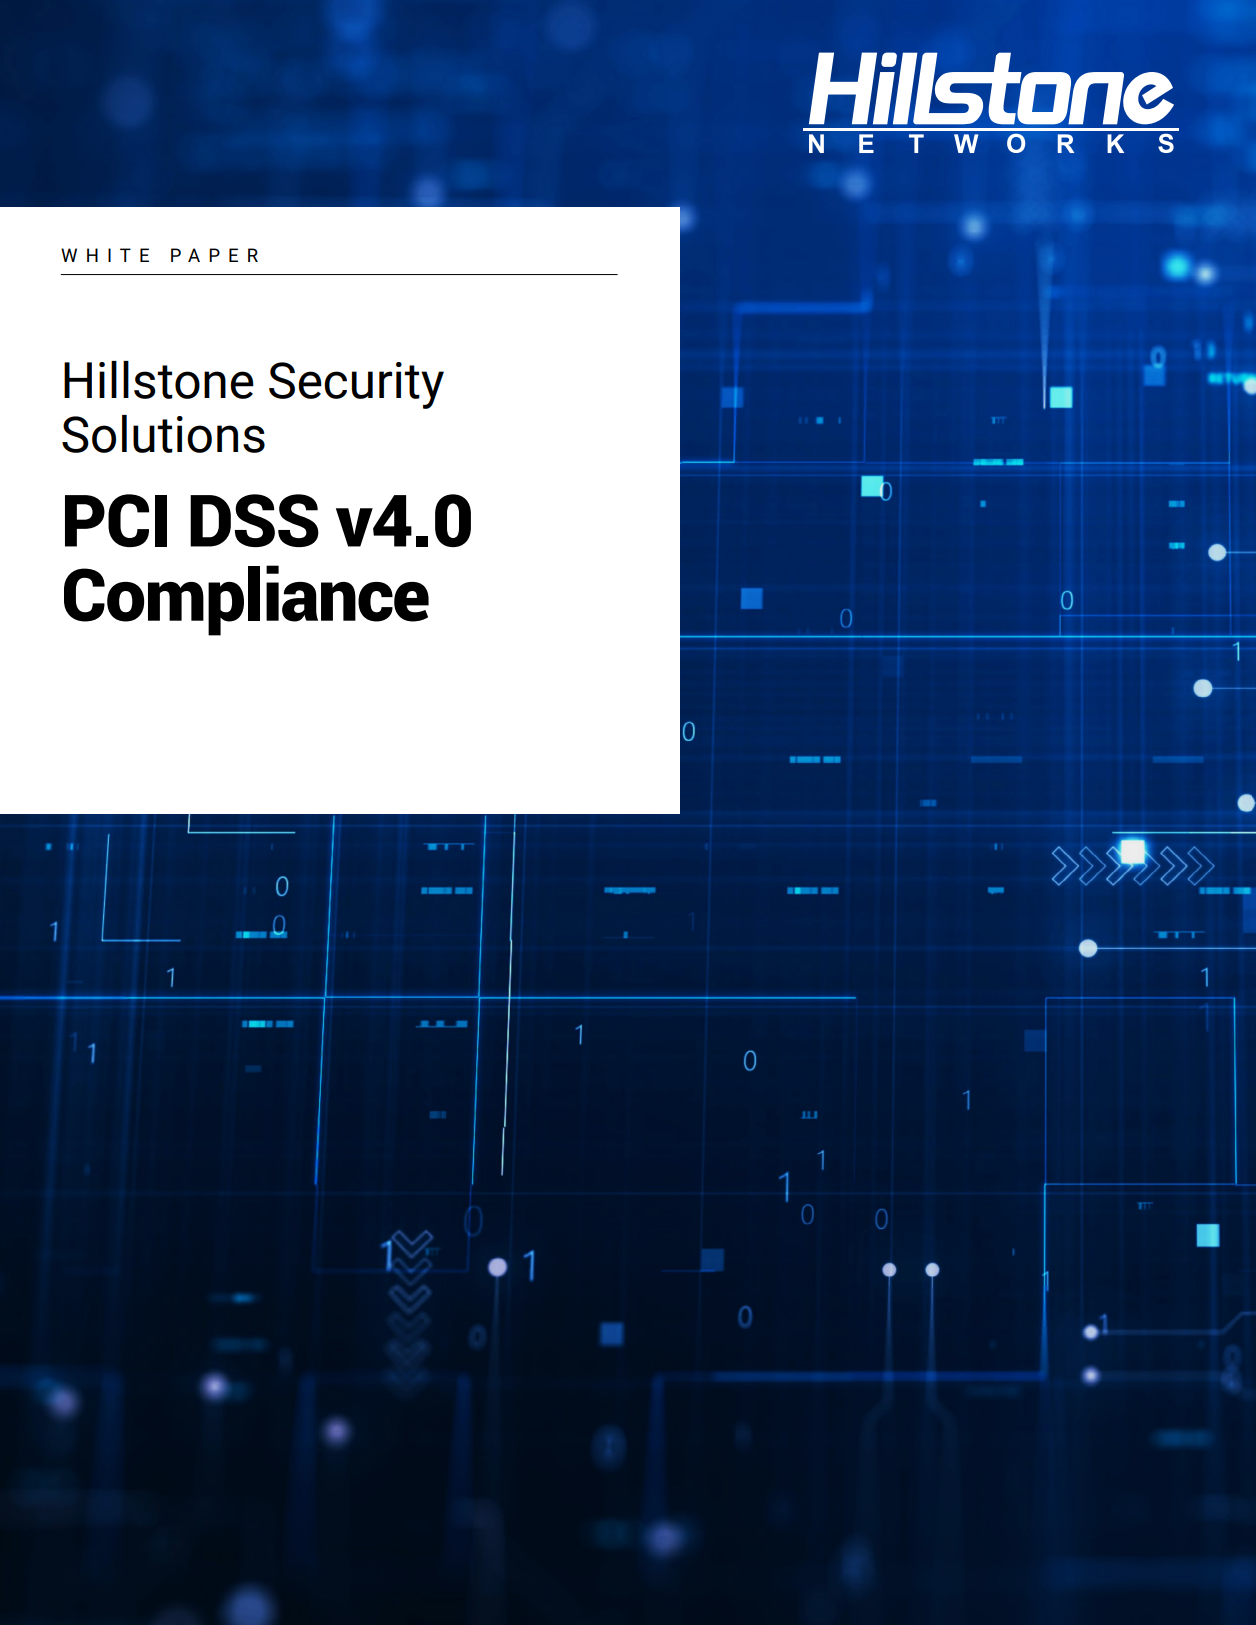 Hillstone Security Solutions PCI DSS v4.0 Compliance